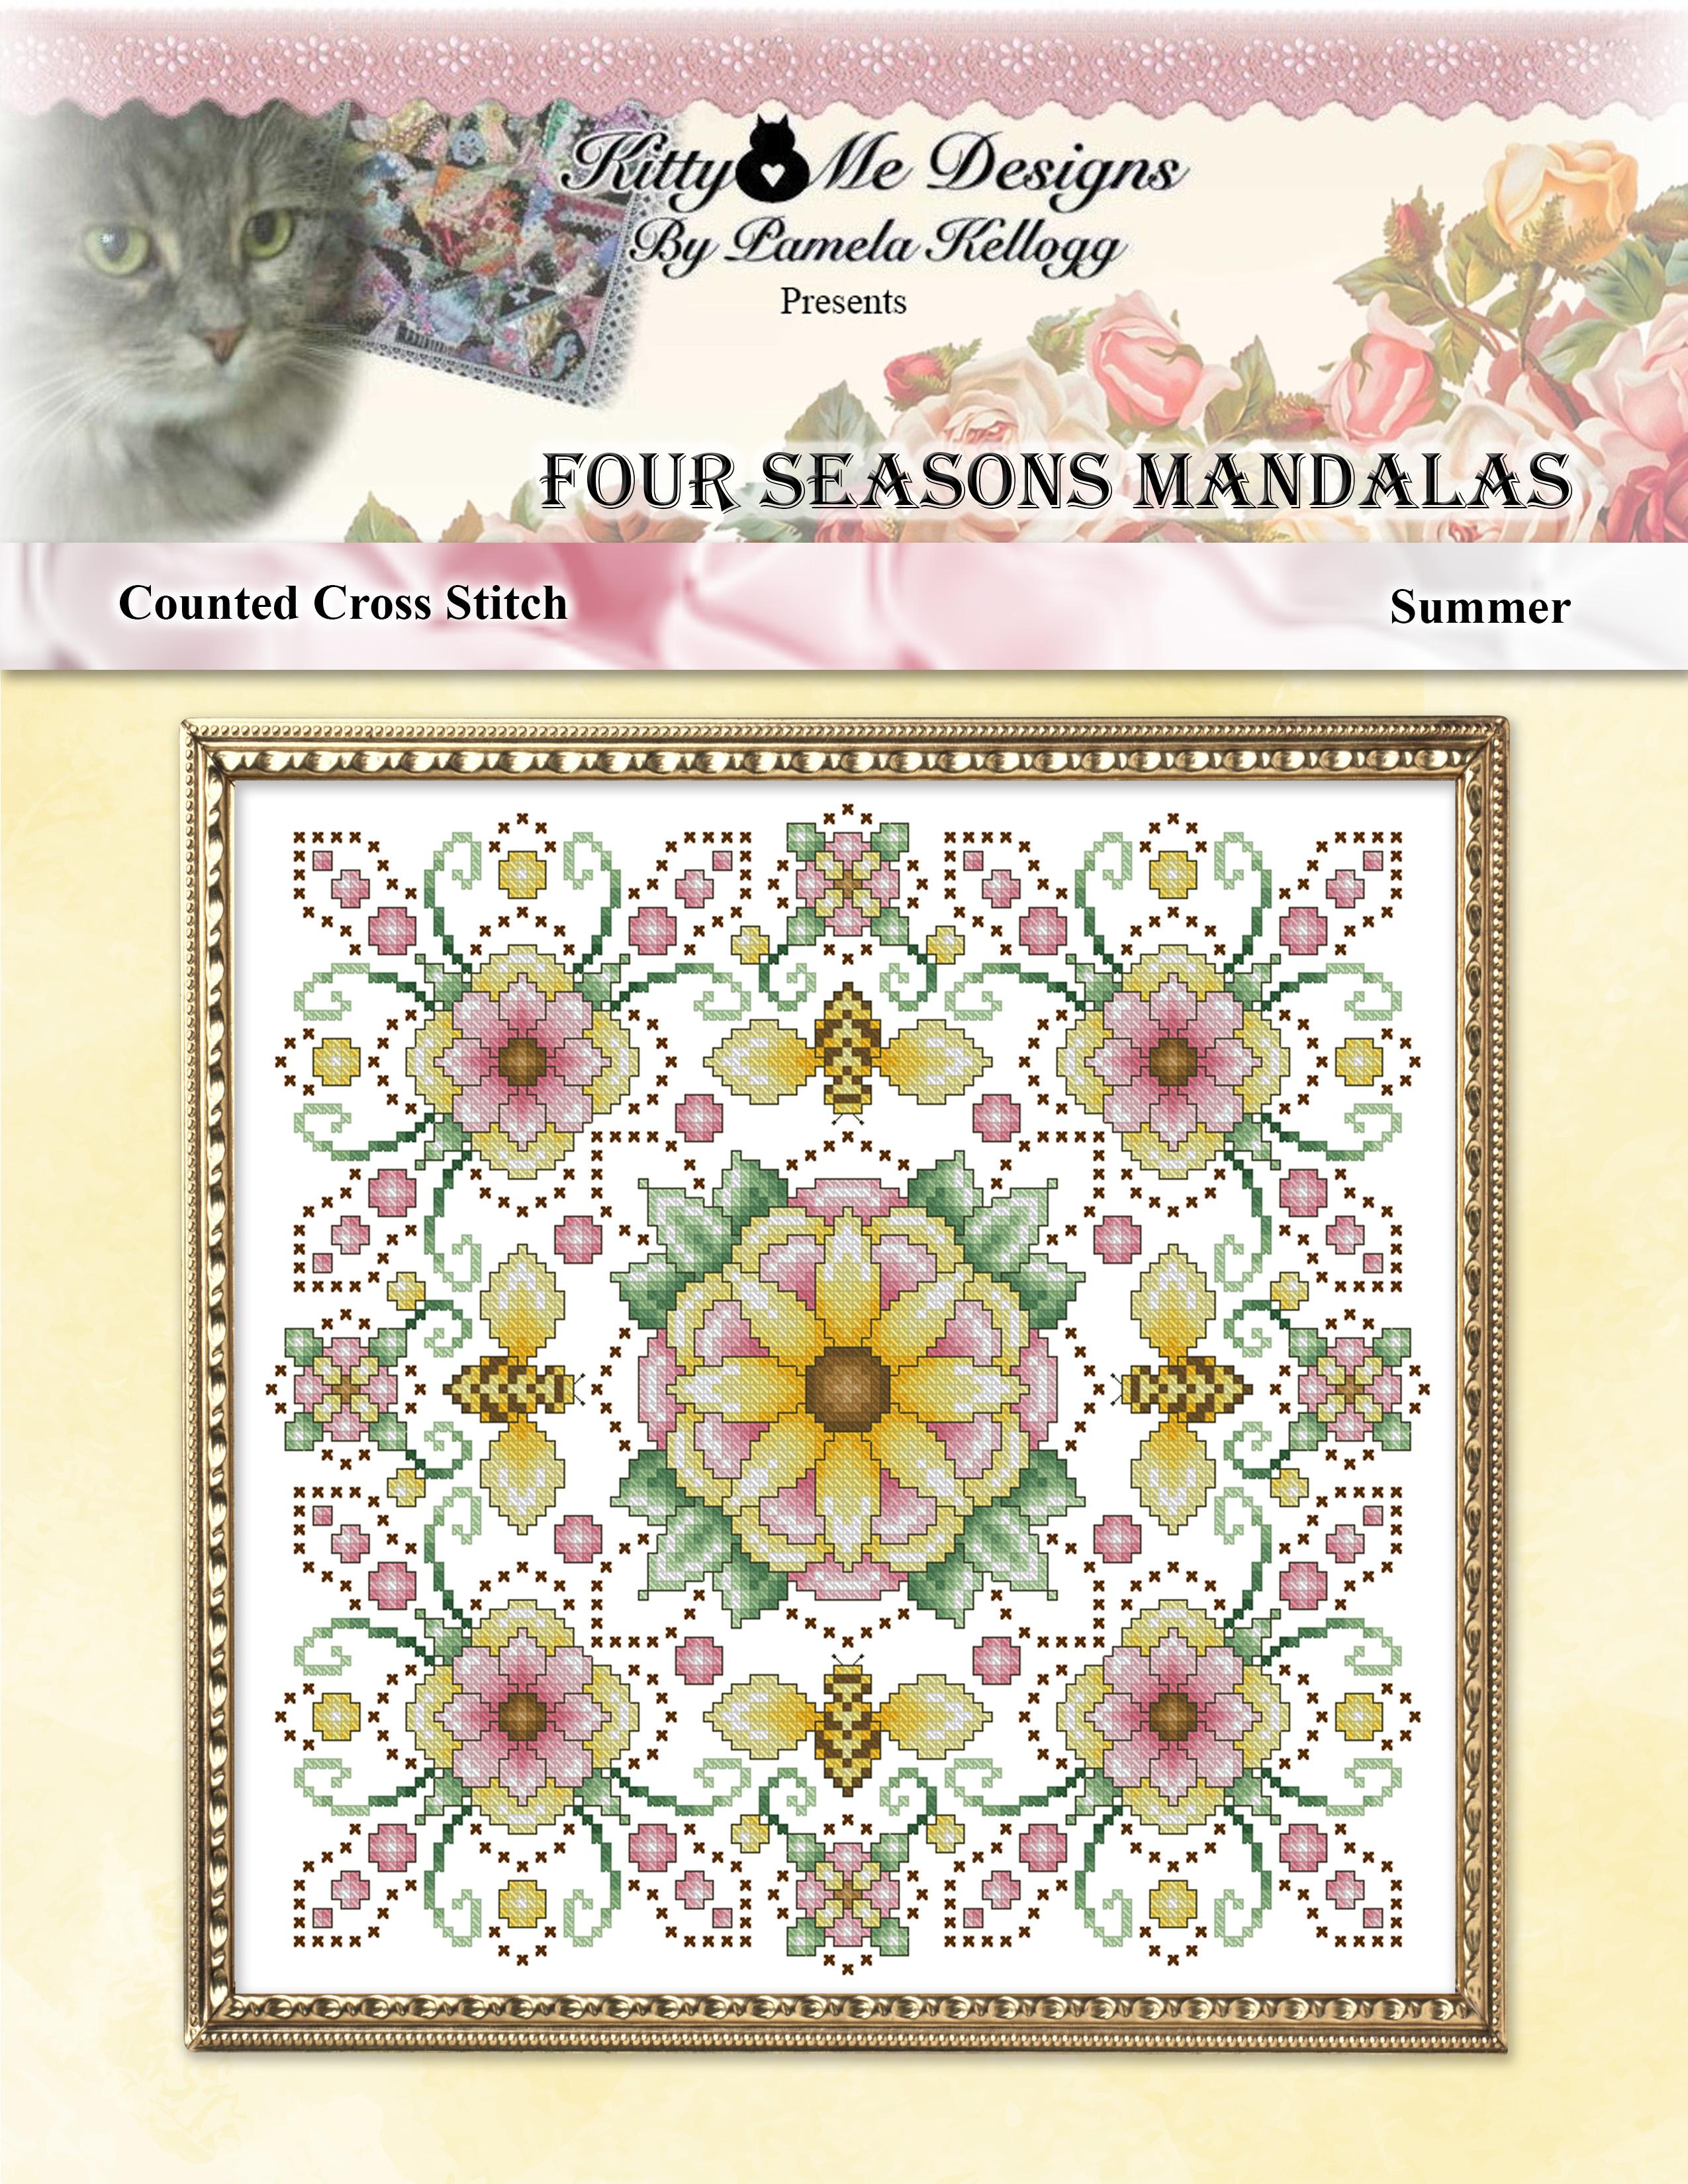 Four Seasons Mandalas: Summer by Kitty and Me Designs